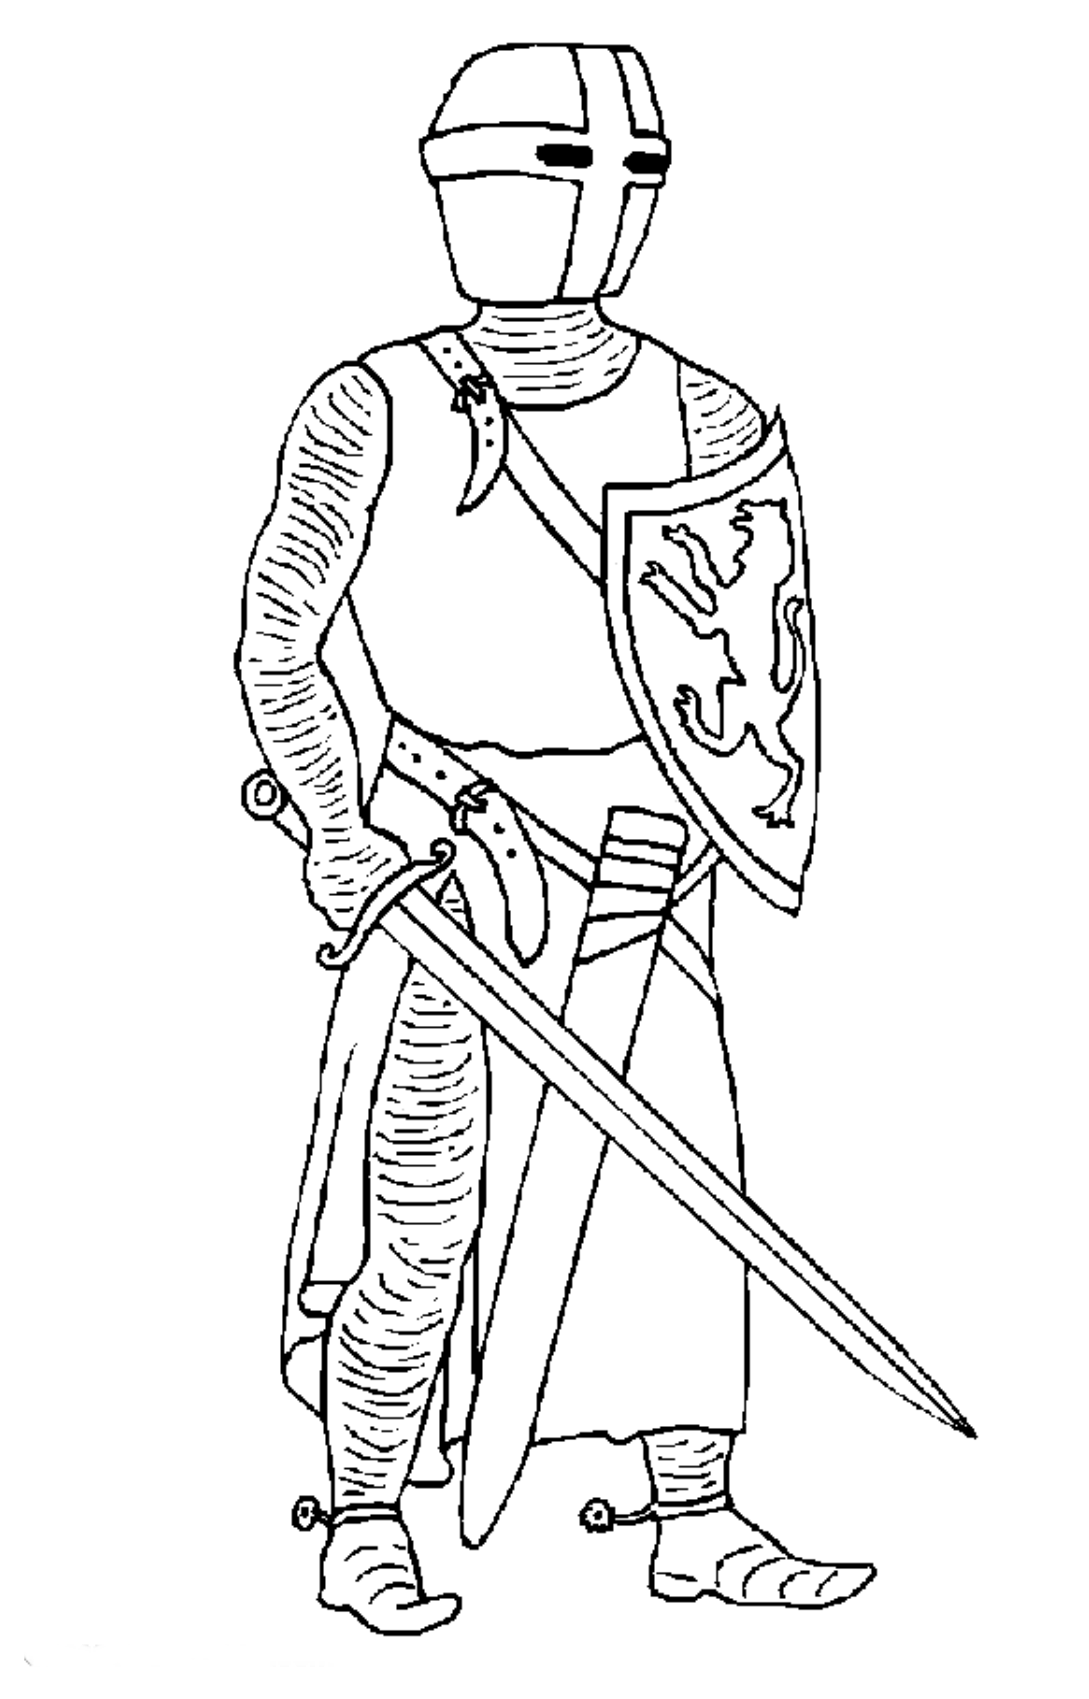 knight coloring page coloring page knight with mace knight coloring page 